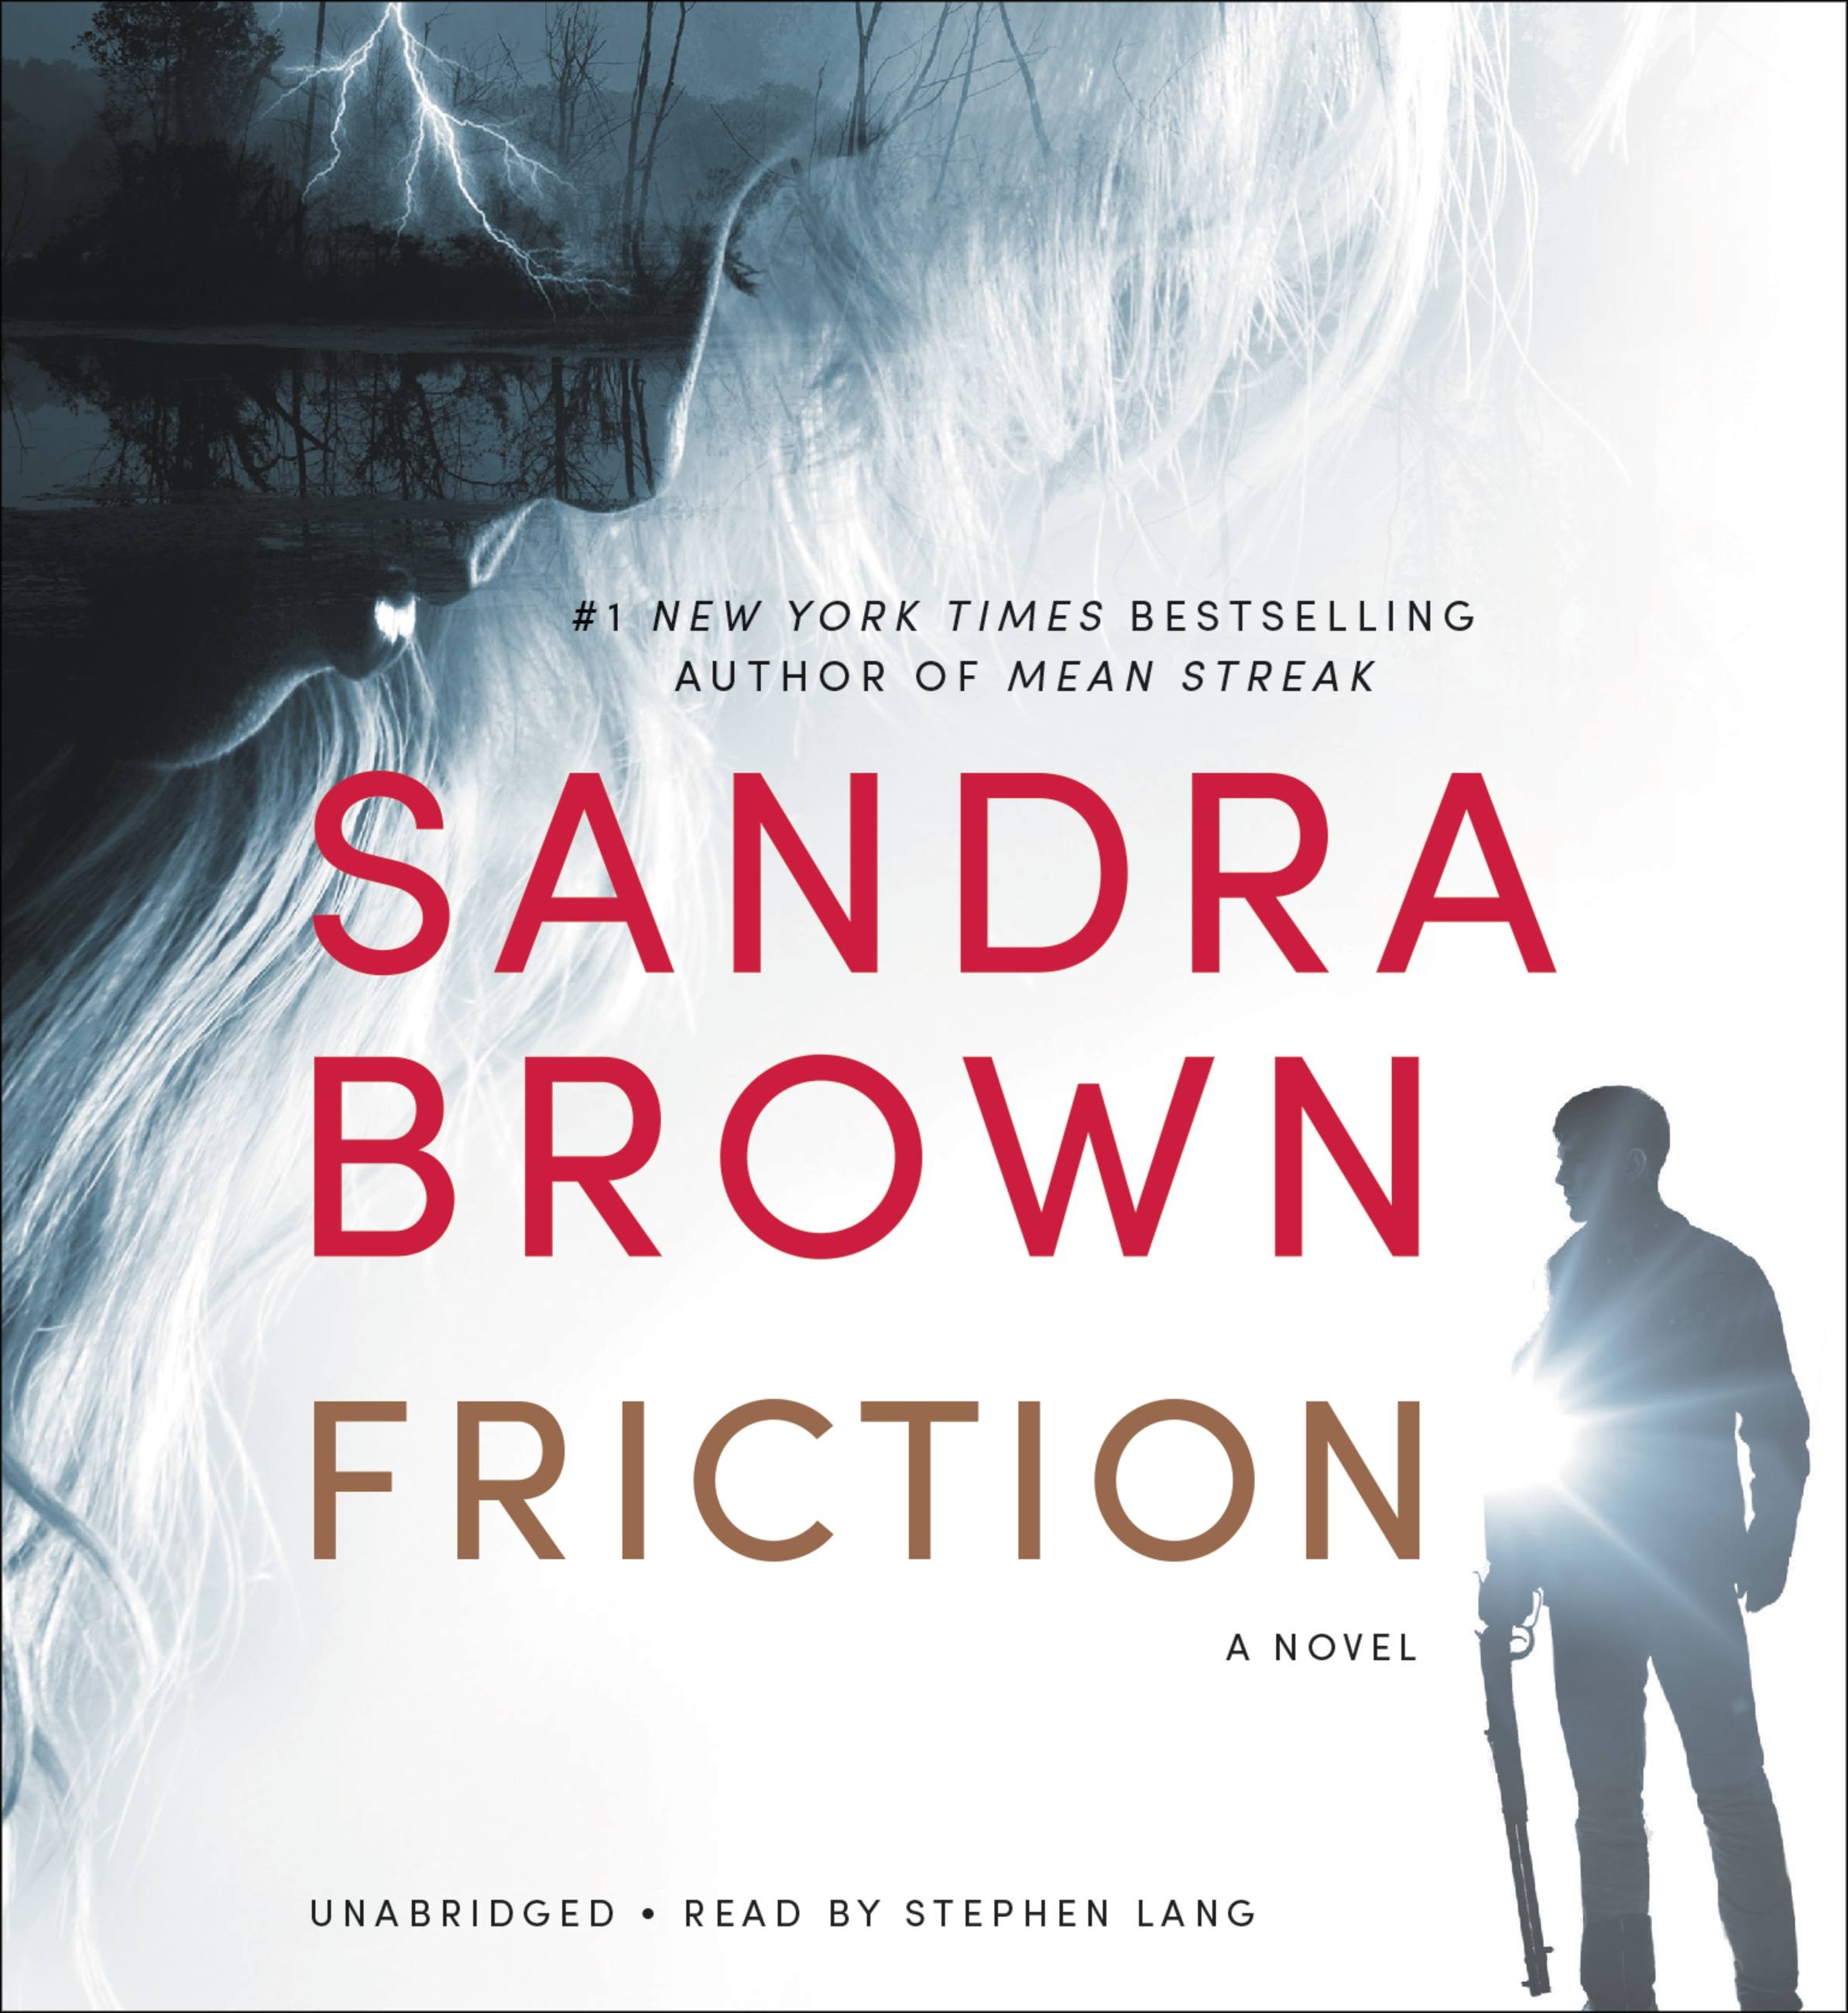 Friction by Sandra Brown Hachette Book Group